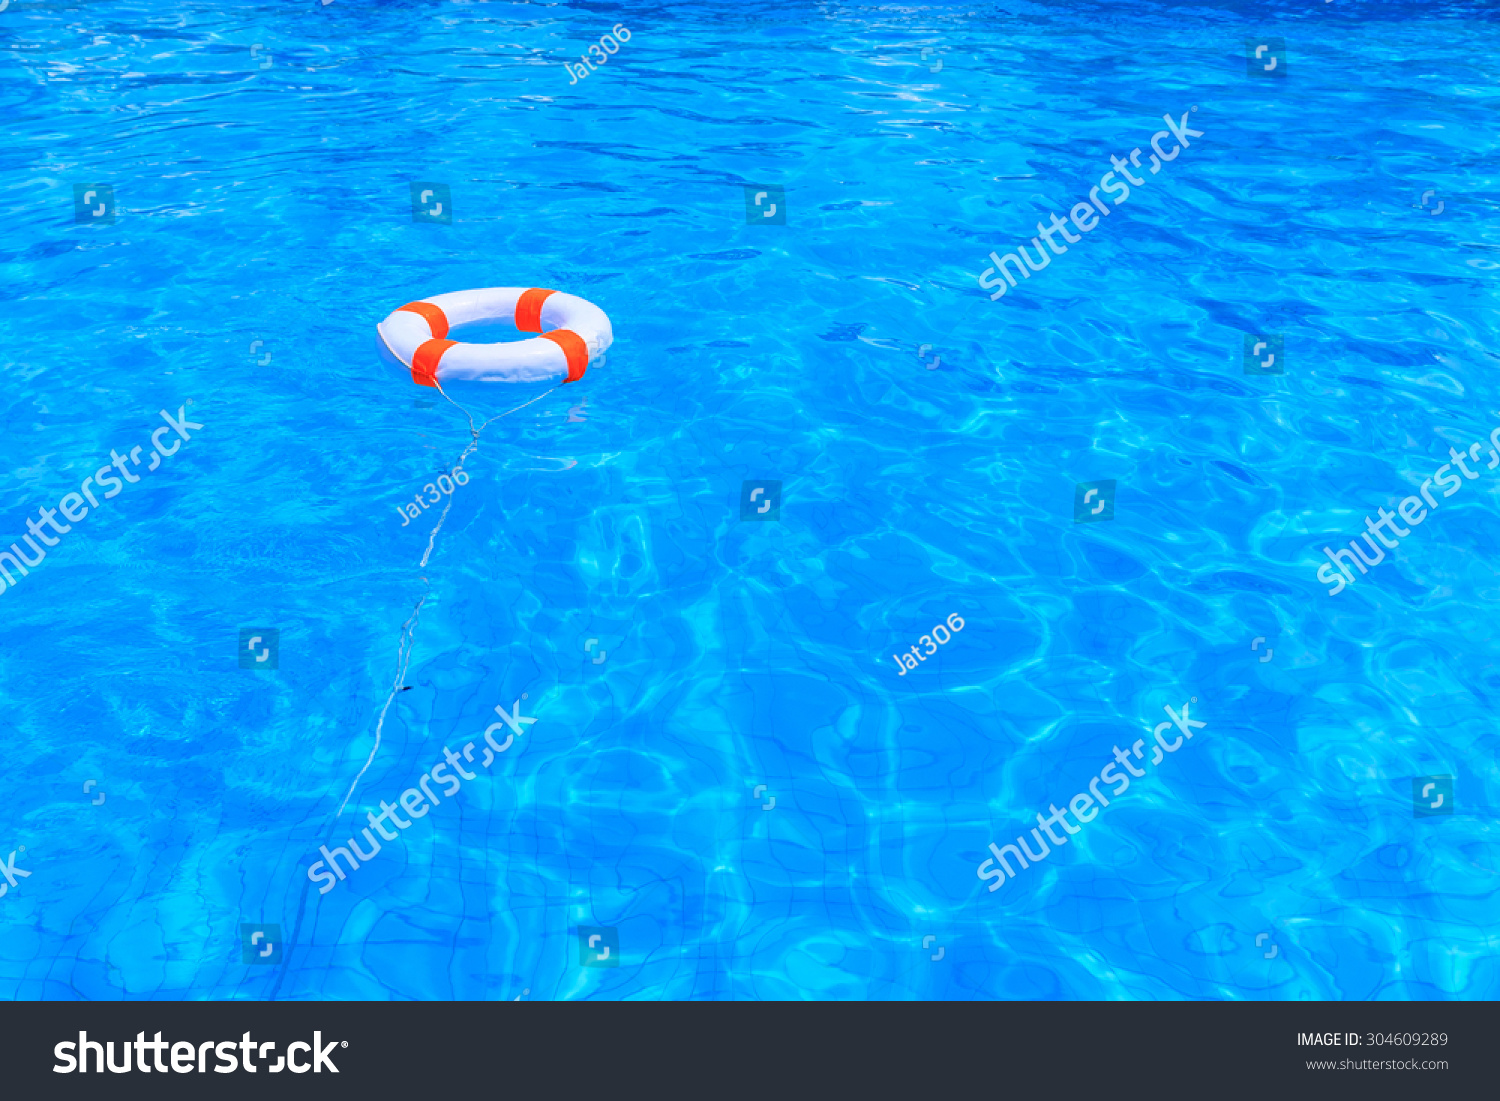 Life Buoy Floating In A Swimming Pool Stock Photo 304609289 : Shutterstock